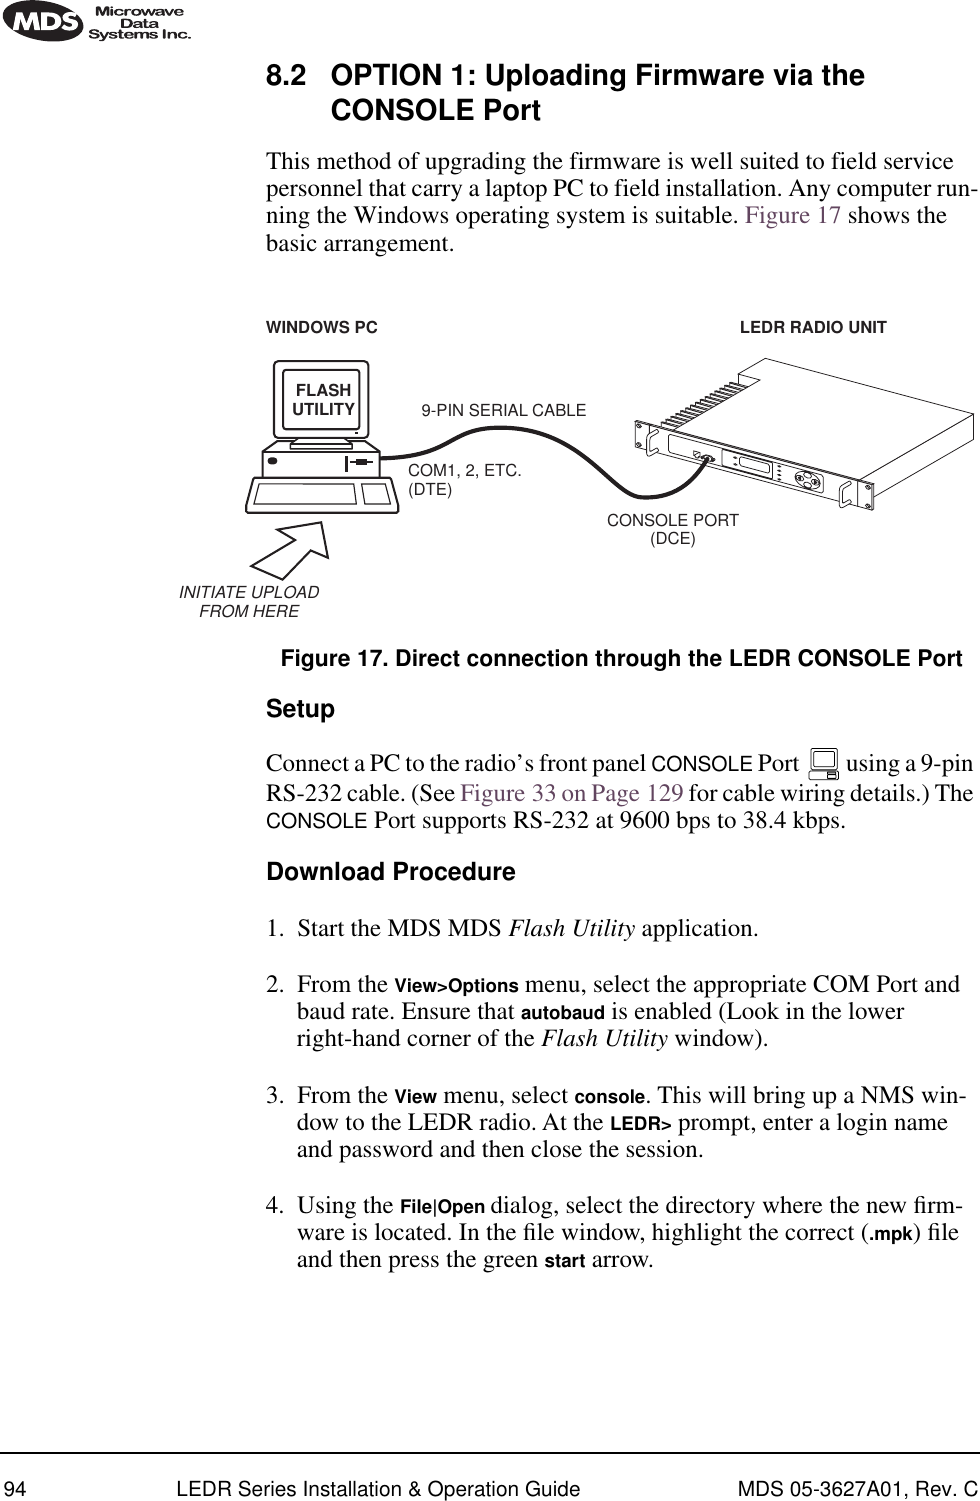 94 LEDR Series Installation &amp; Operation Guide MDS 05-3627A01, Rev. C8.2 OPTION 1: Uploading Firmware via the CONSOLE PortThis method of upgrading the firmware is well suited to field service personnel that carry a laptop PC to field installation. Any computer run-ning the Windows operating system is suitable. Figure 17 shows the basic arrangement.Invisible place holderFigure 17. Direct connection through the LEDR CONSOLE PortSetupConnect a PC to the radio’s front panel CONSOLE Port   using a 9-pin RS-232 cable. (See Figure 33 on Page 129 for cable wiring details.) The CONSOLE Port supports RS-232 at 9600 bps to 38.4 kbps.Download Procedure1. Start the MDS MDS Flash Utility application. 2. From the View&gt;Options menu, select the appropriate COM Port and baud rate. Ensure that autobaud is enabled (Look in the lower right-hand corner of the Flash Utility window). 3. From the View menu, select console. This will bring up a NMS win-dow to the LEDR radio. At the LEDR&gt; prompt, enter a login name and password and then close the session. 4. Using the File|Open dialog, select the directory where the new ﬁrm-ware is located. In the ﬁle window, highlight the correct (.mpk) ﬁle and then press the green start arrow. FLASHUTILITYCOM1, 2, ETC.(DTE)9-PIN SERIAL CABLECONSOLE PORT(DCE)INITIATE UPLOADFROM HERELEDR RADIO UNITWINDOWS PC